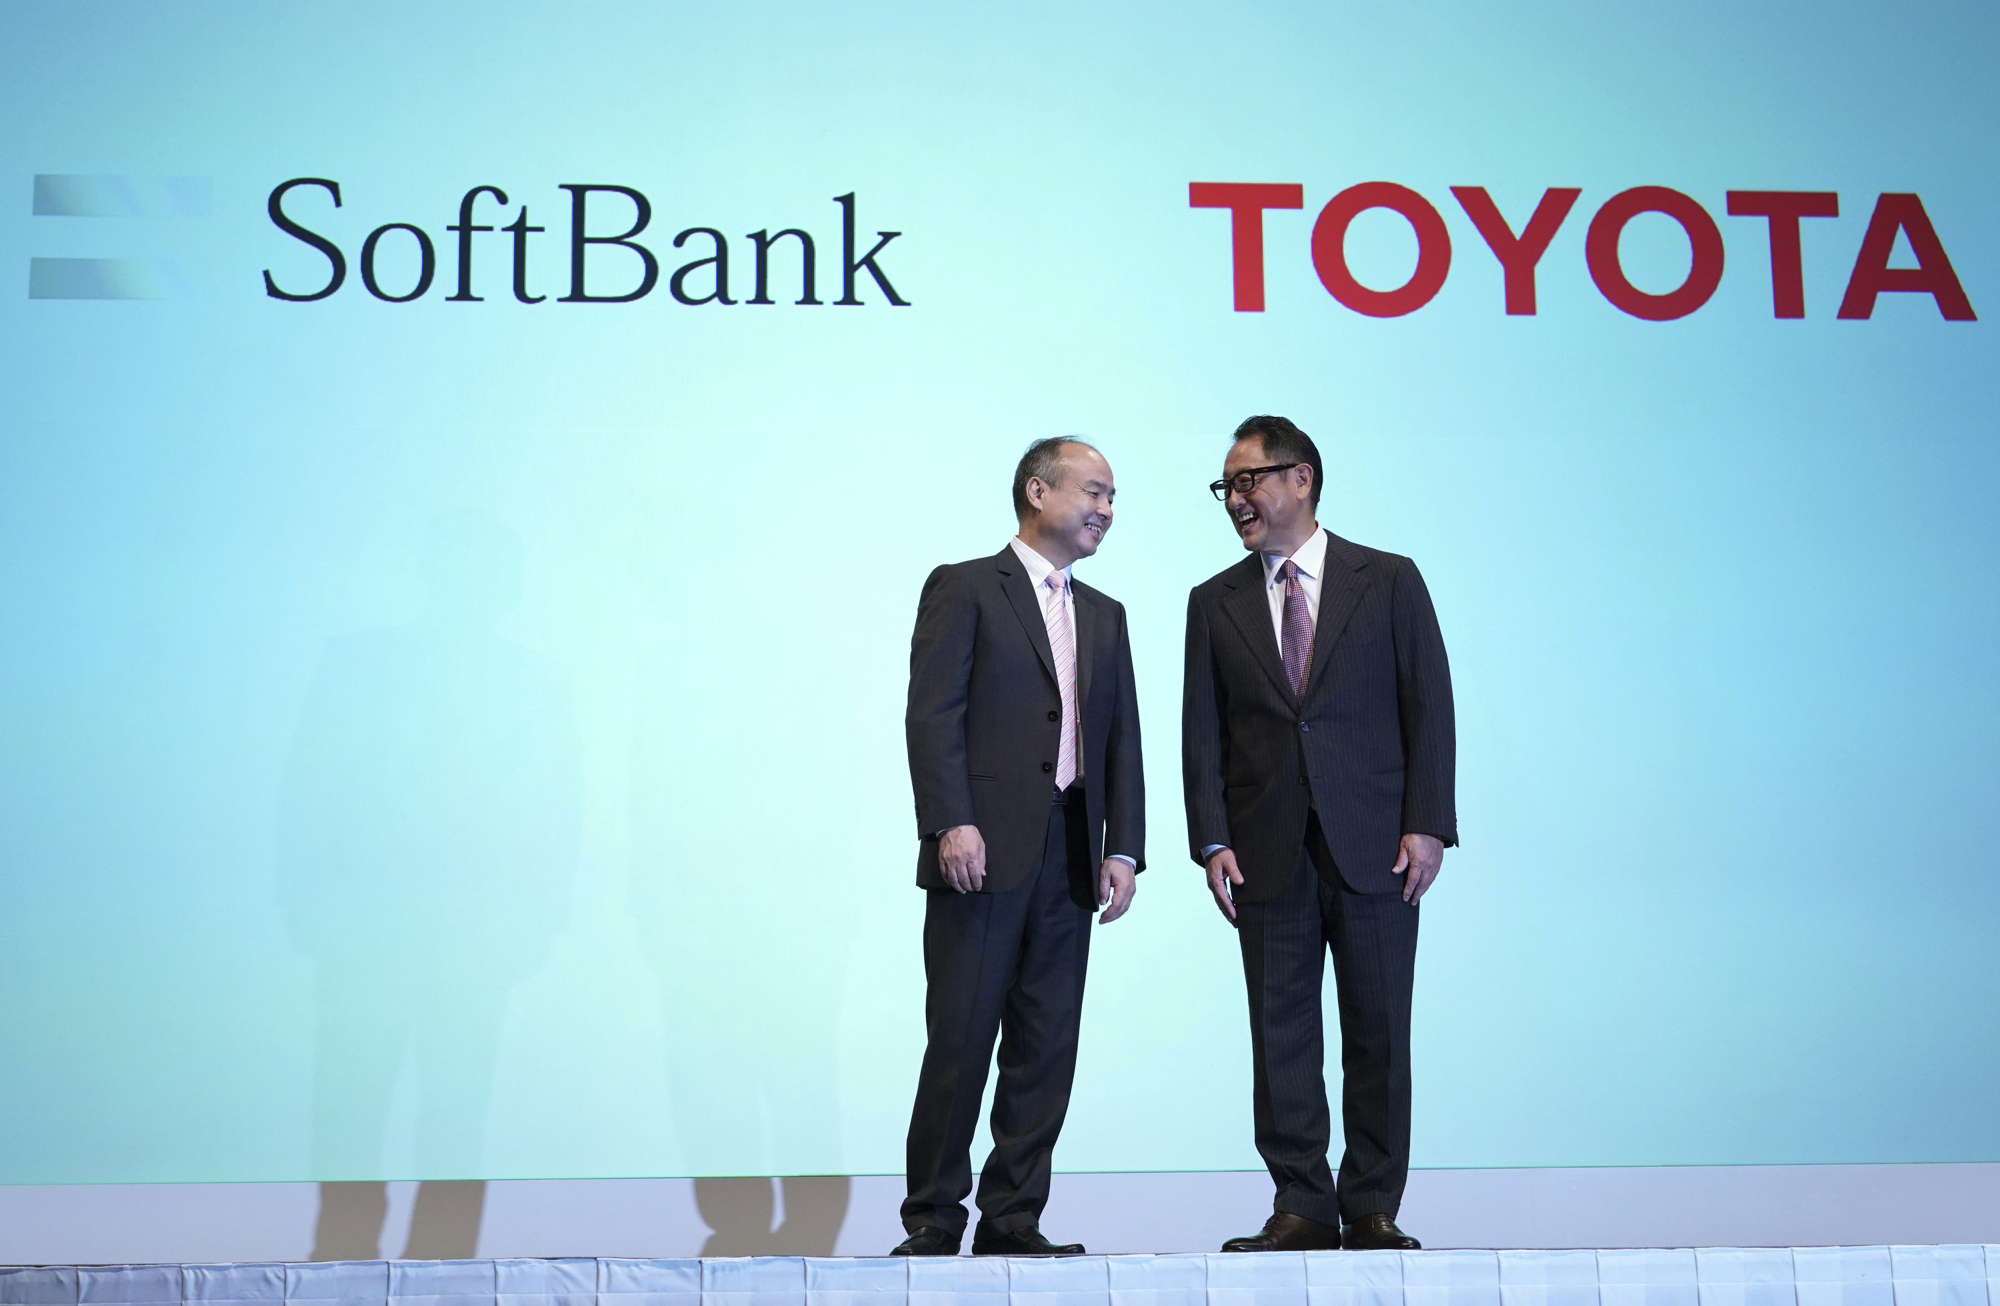 Softbank Group Corp. Chairman Masayoshi Son, left, and Akio Toyoda, right, President of Toyota Motor Corporation chat during a photo session during a press conference in Tokyo Thursday, Oct. 4, 2018. Japan窶冱 No. 1 automaker Toyota Motor Corp. and technology giant SoftBank Group Corp. say they are setting up a joint venture to create mobility services. (AP Photo/Eugene Hoshiko)